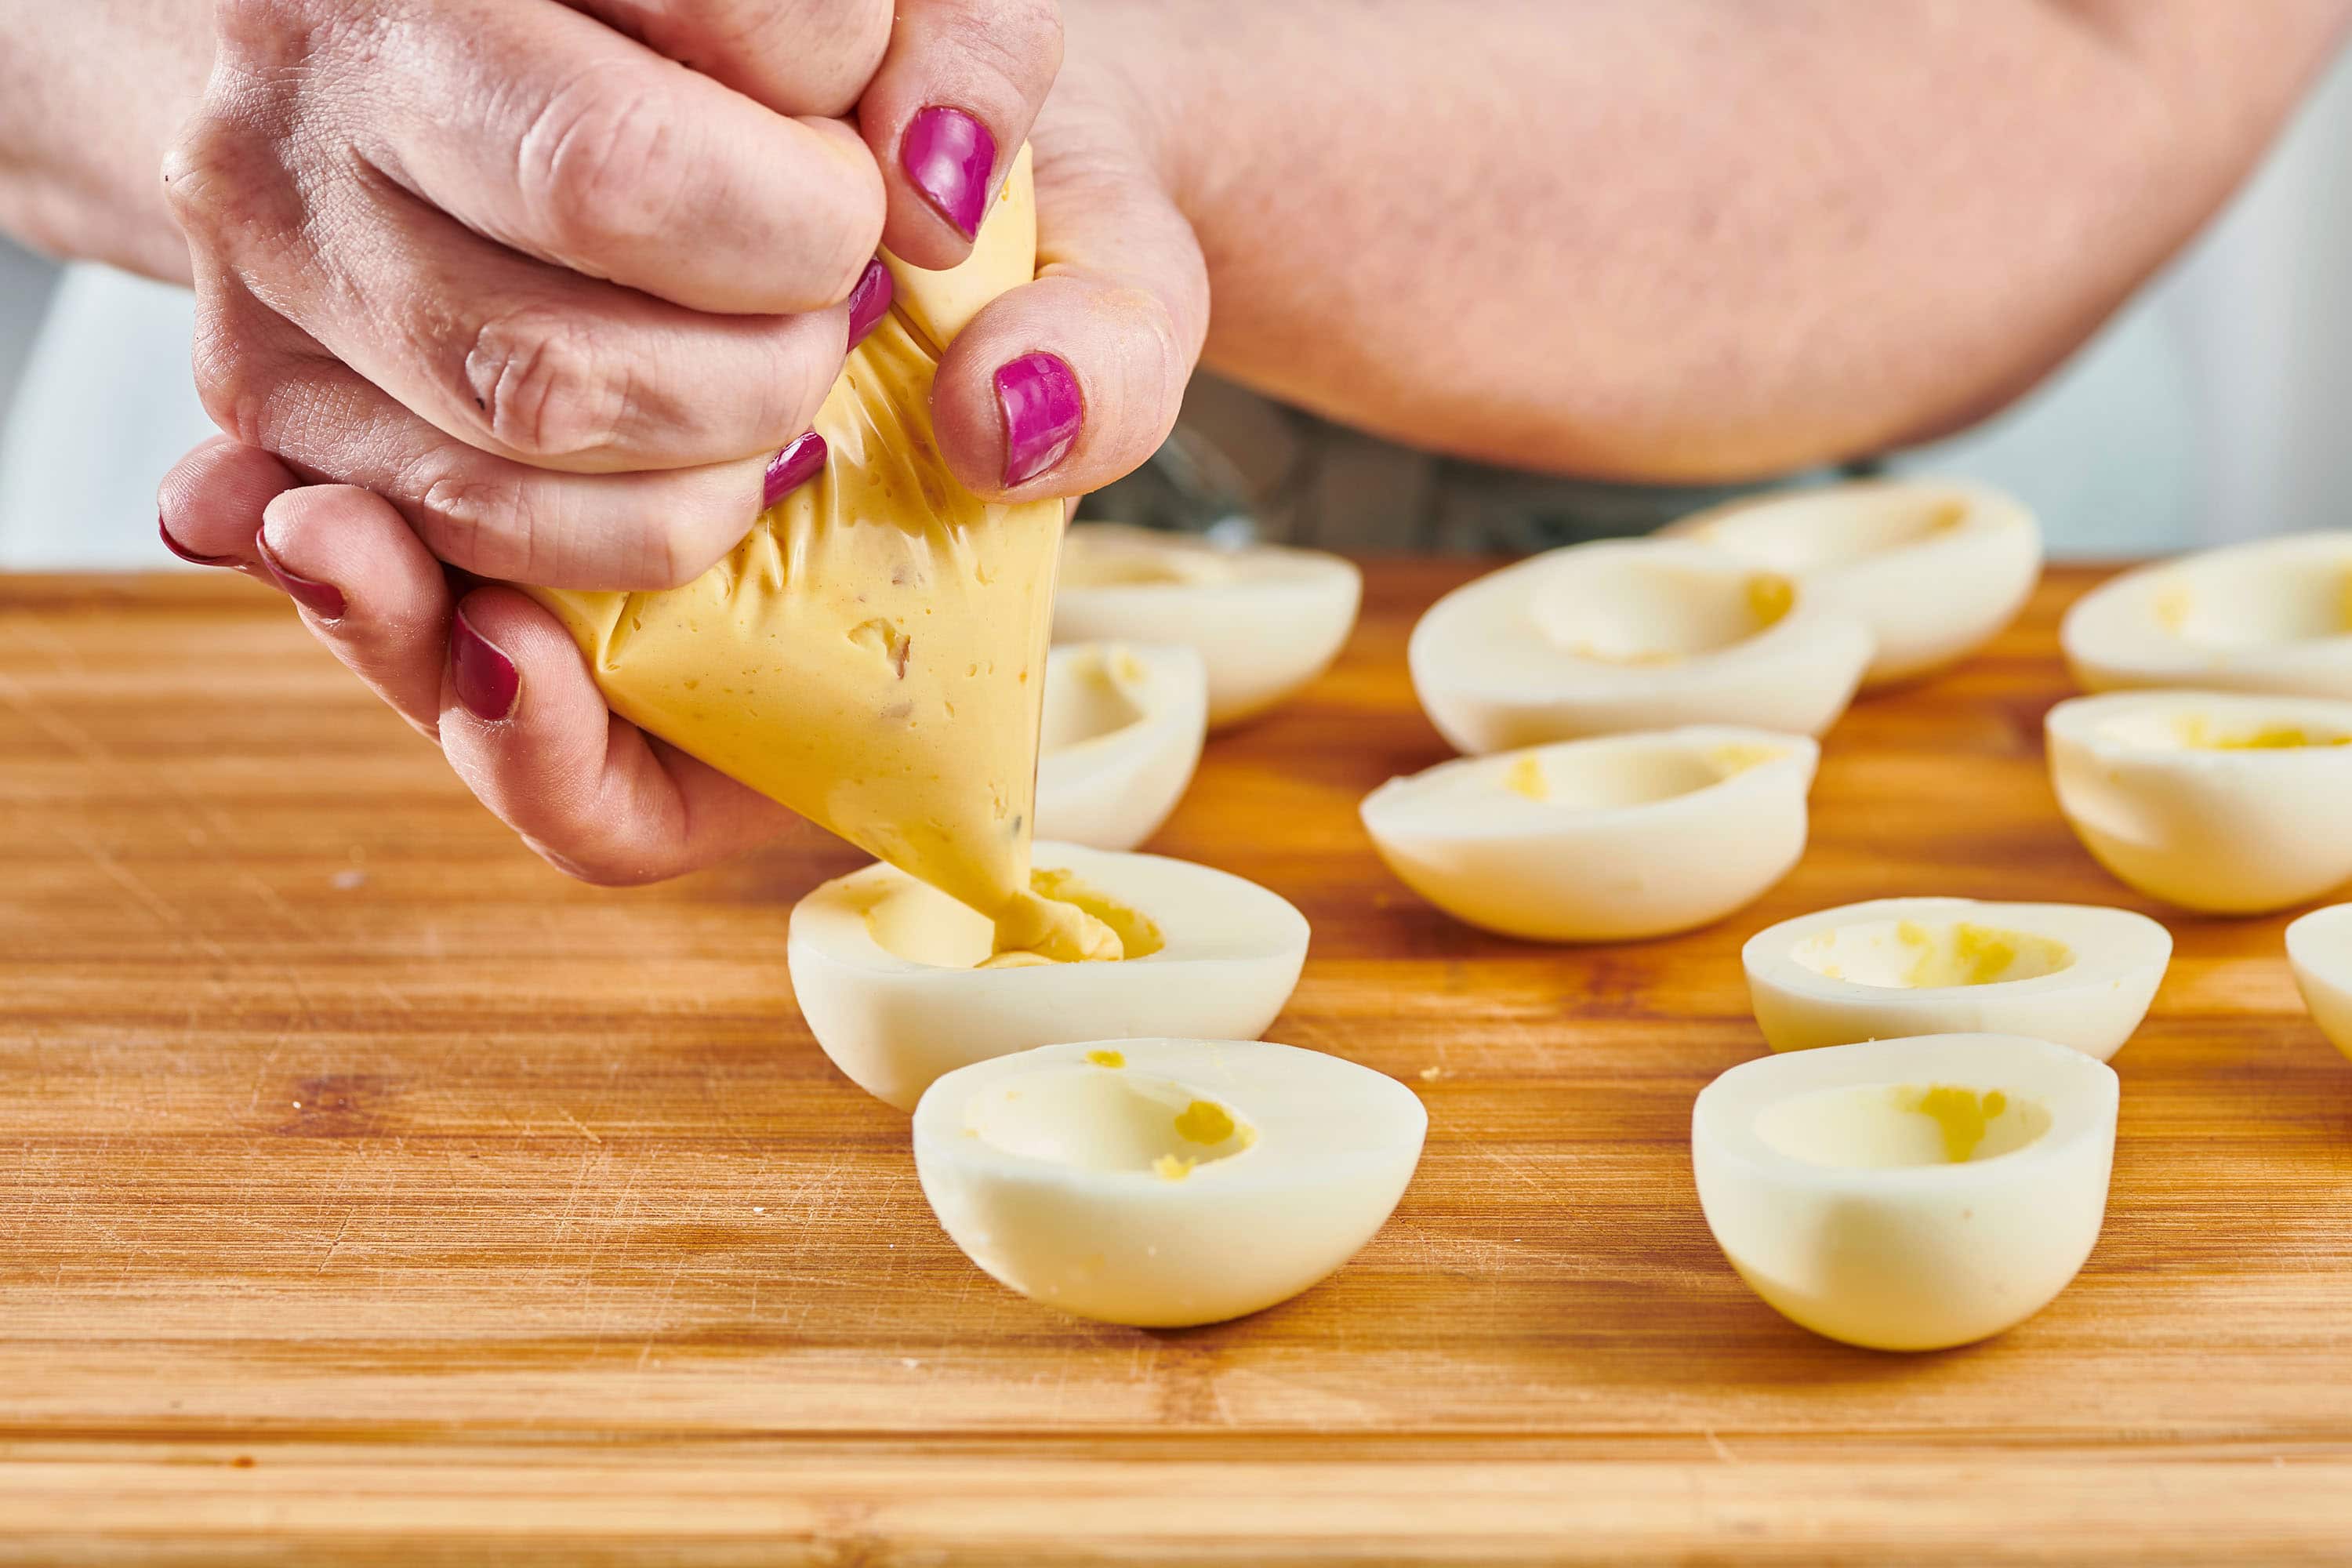 Woman piping filling into Deviled Eggs